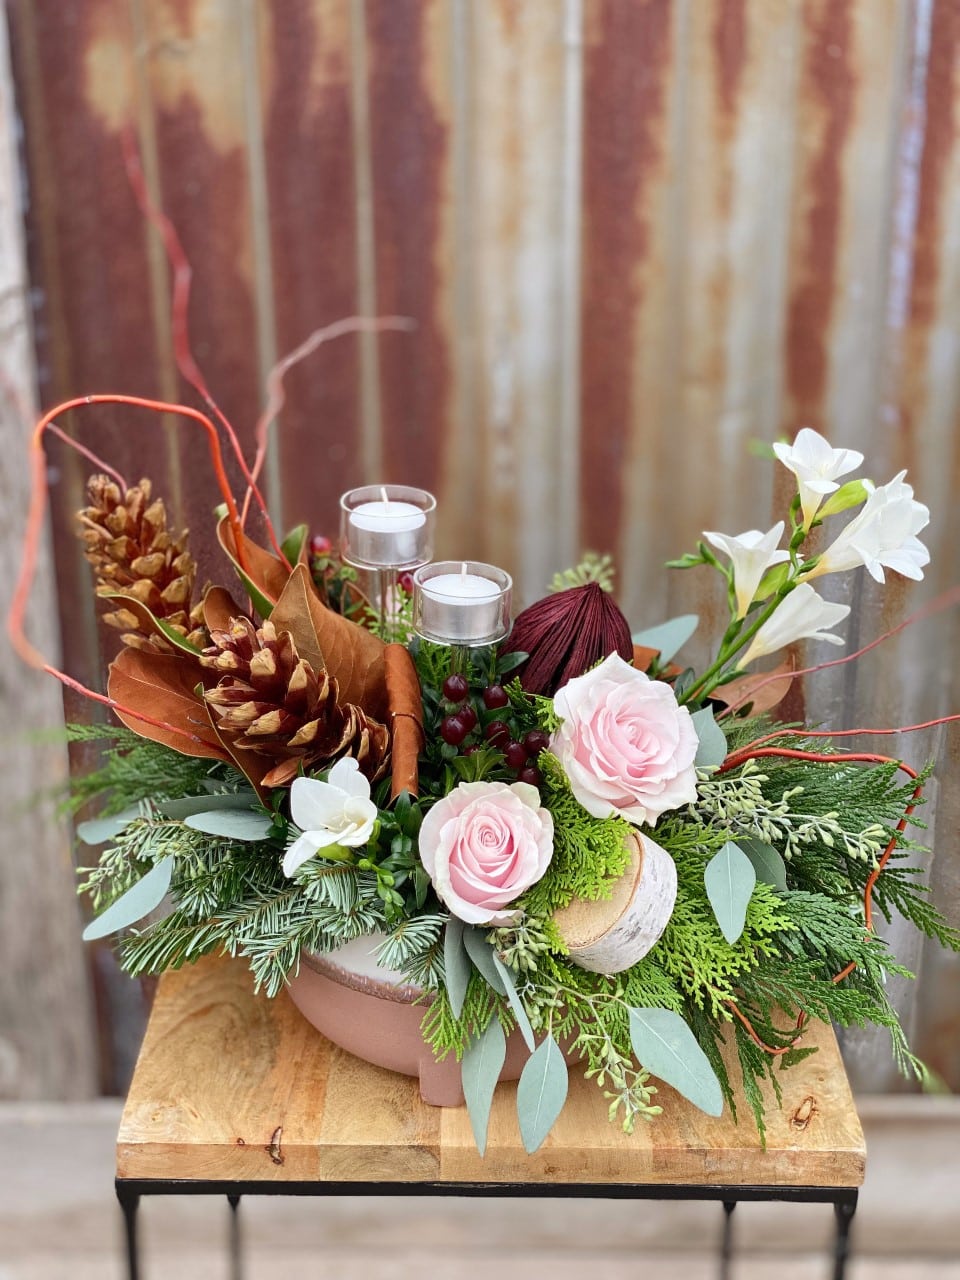 The Watering Can | A blush and burgundy European style arrangement with winter greens, pincones, and two tea light holders in a pink ceramic container.